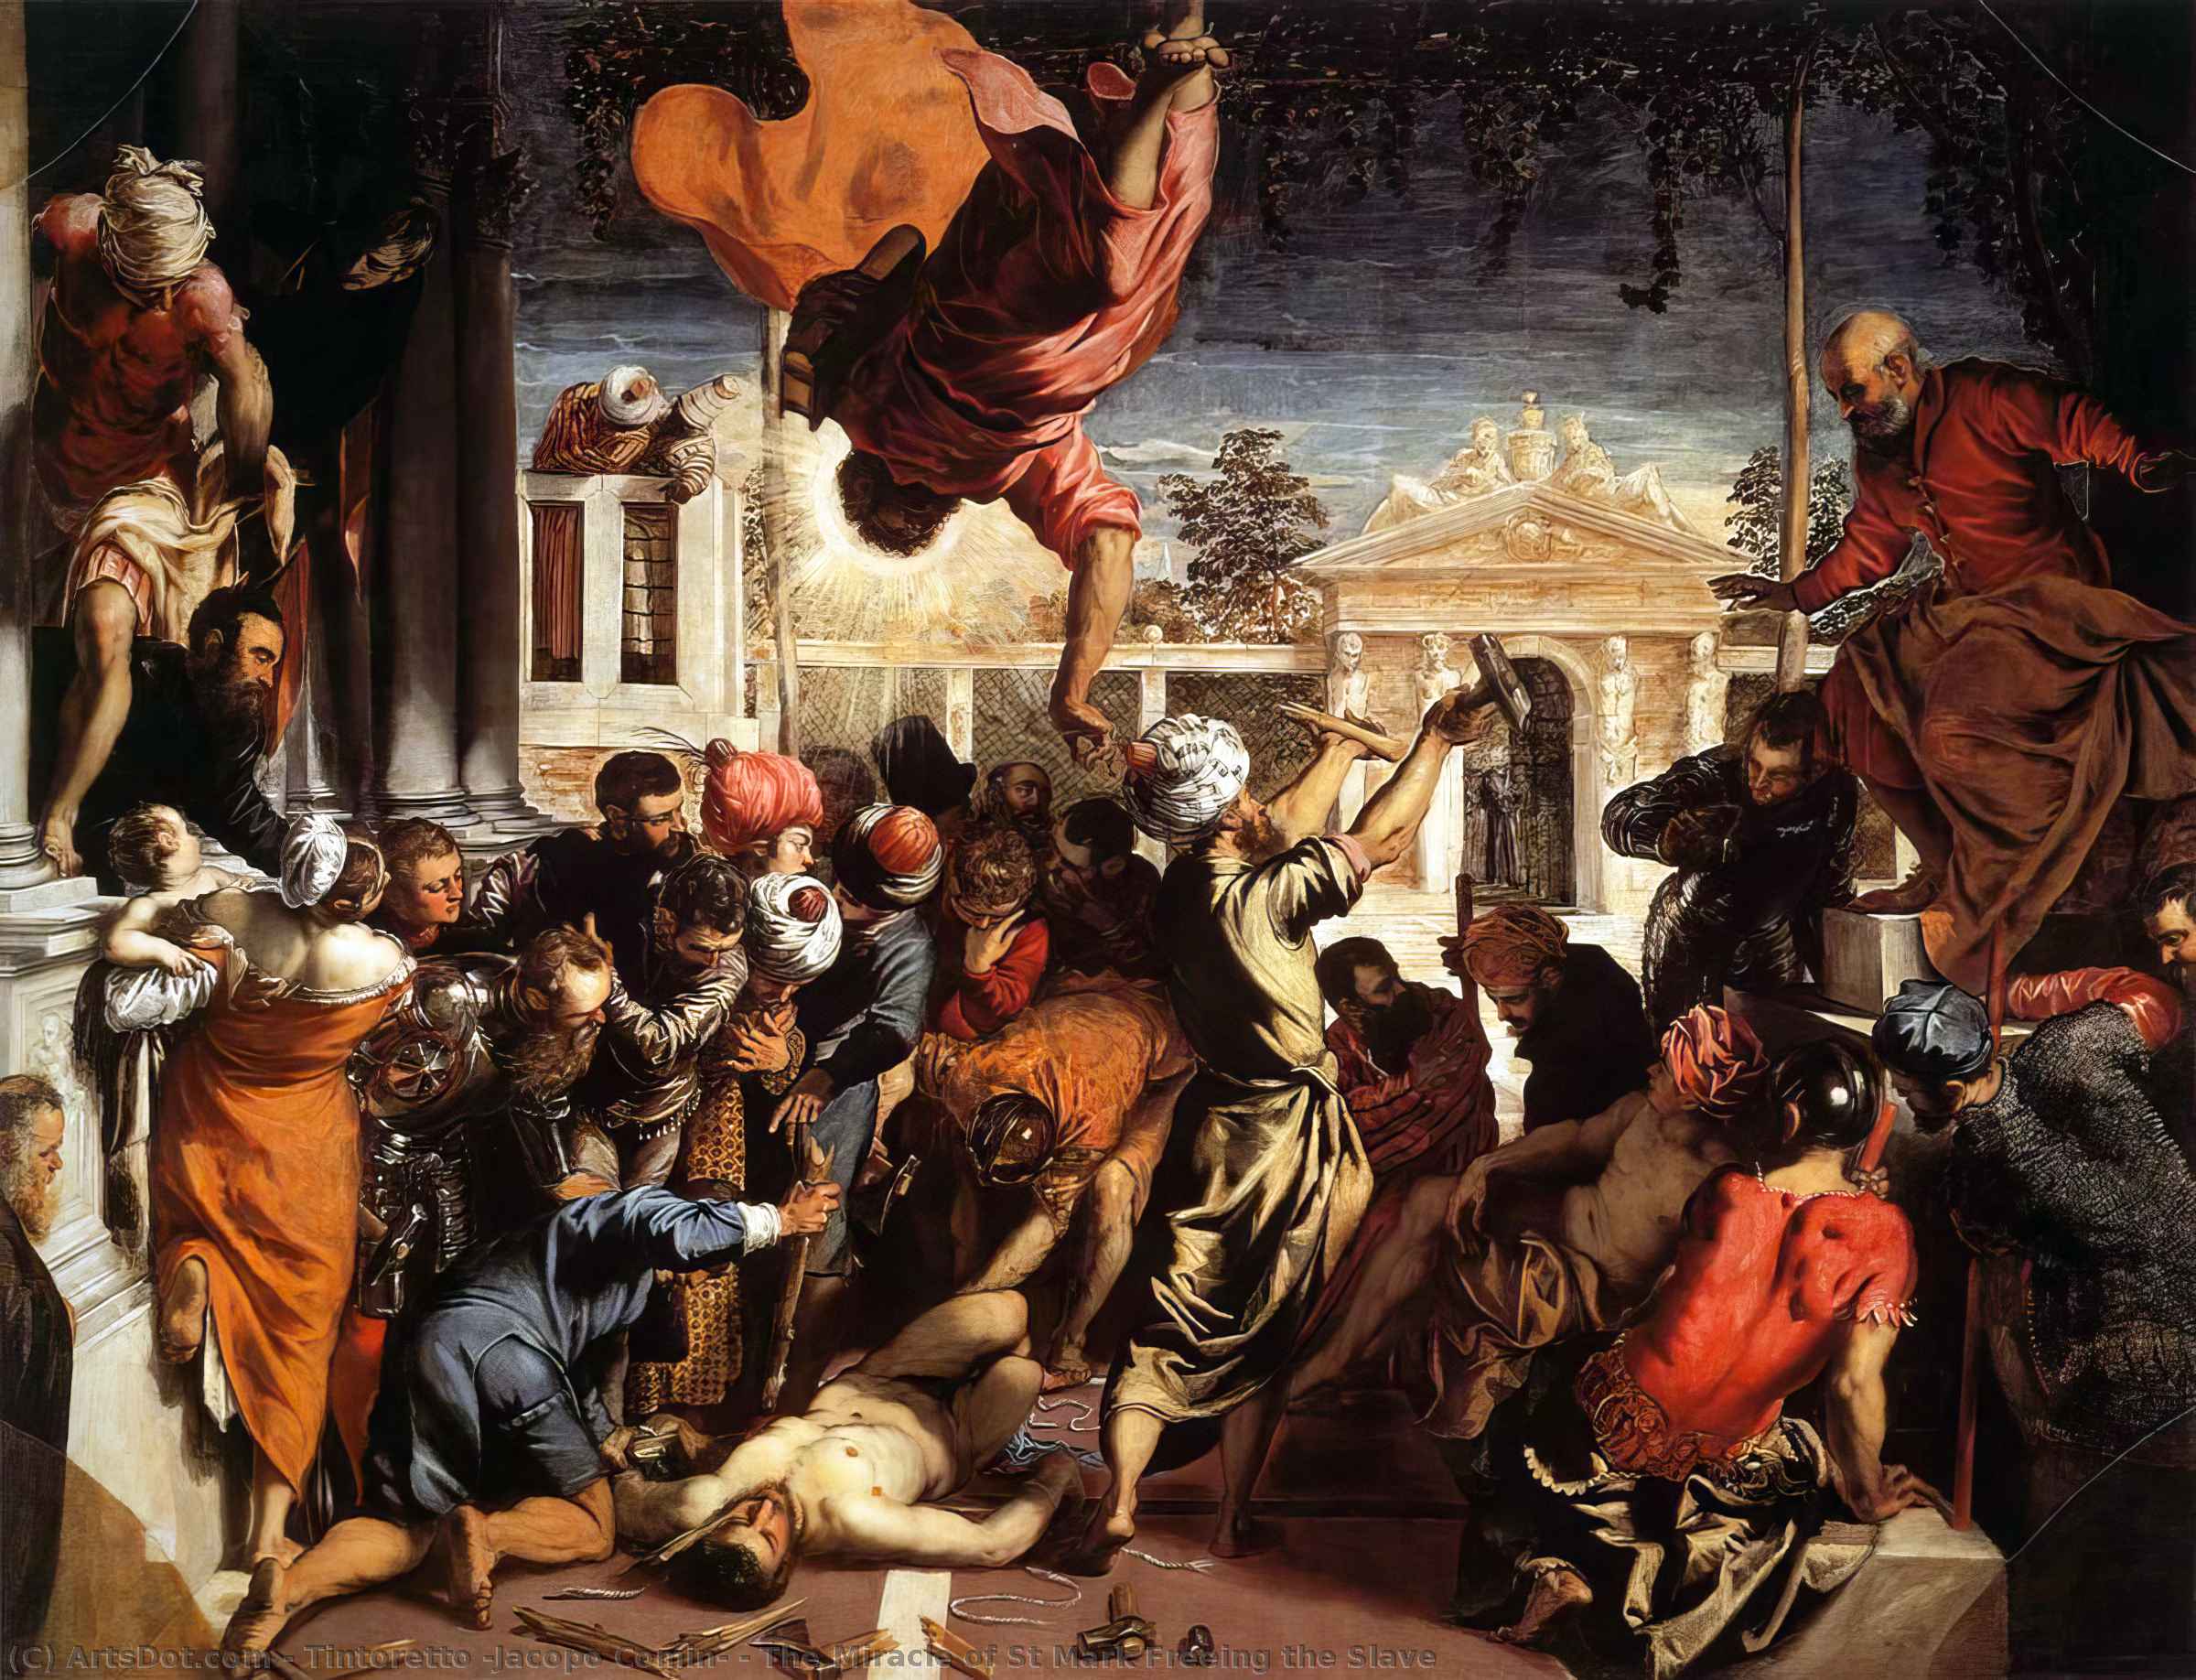 Wikioo.org - สารานุกรมวิจิตรศิลป์ - จิตรกรรม Tintoretto (Jacopo Comin) - The Miracle of St Mark Freeing the Slave